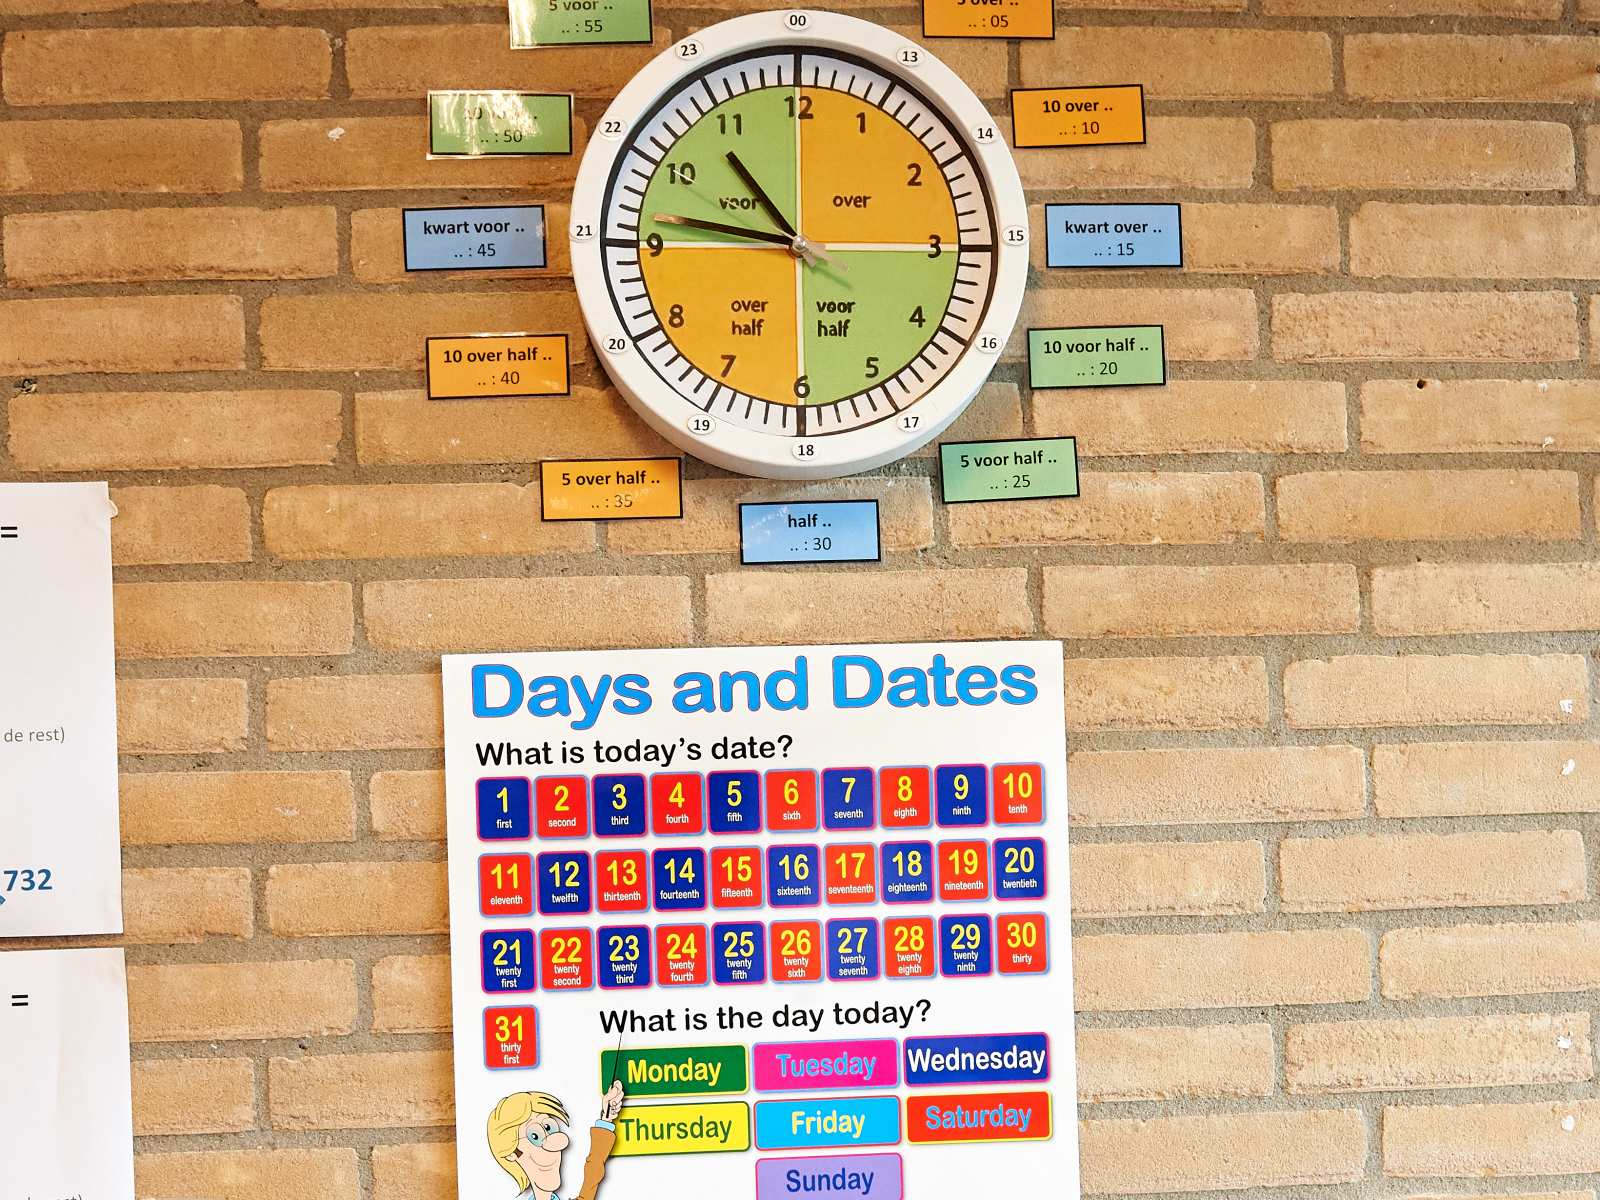 Days and dates